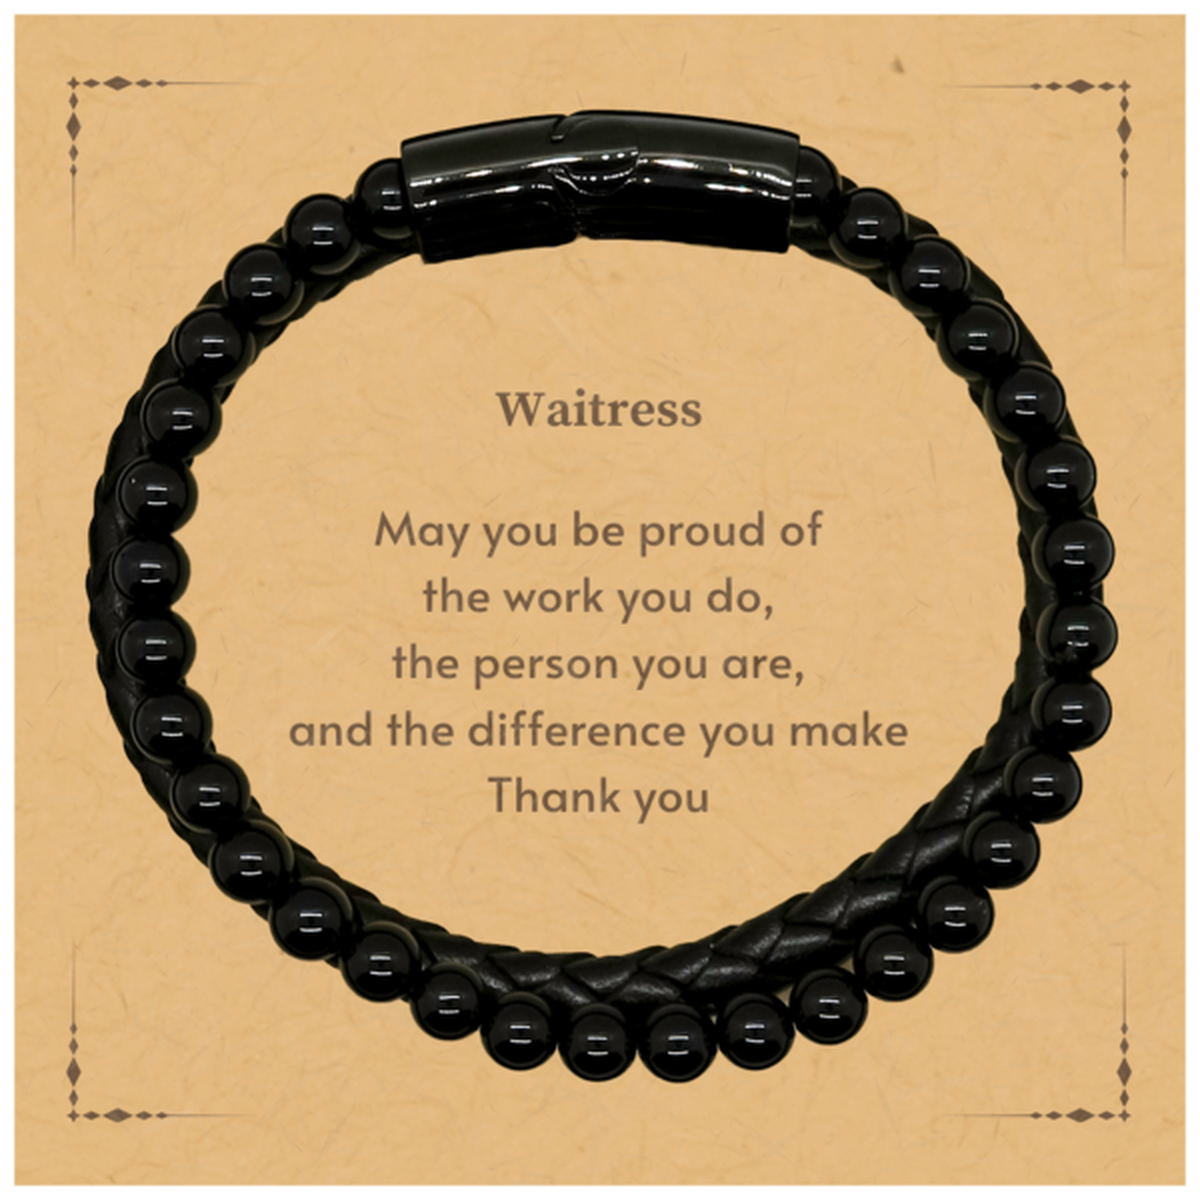 Heartwarming Stone Leather Bracelets Retirement Coworkers Gifts for Waitress, Waitress May You be proud of the work you do, the person you are Gifts for Boss Men Women Friends